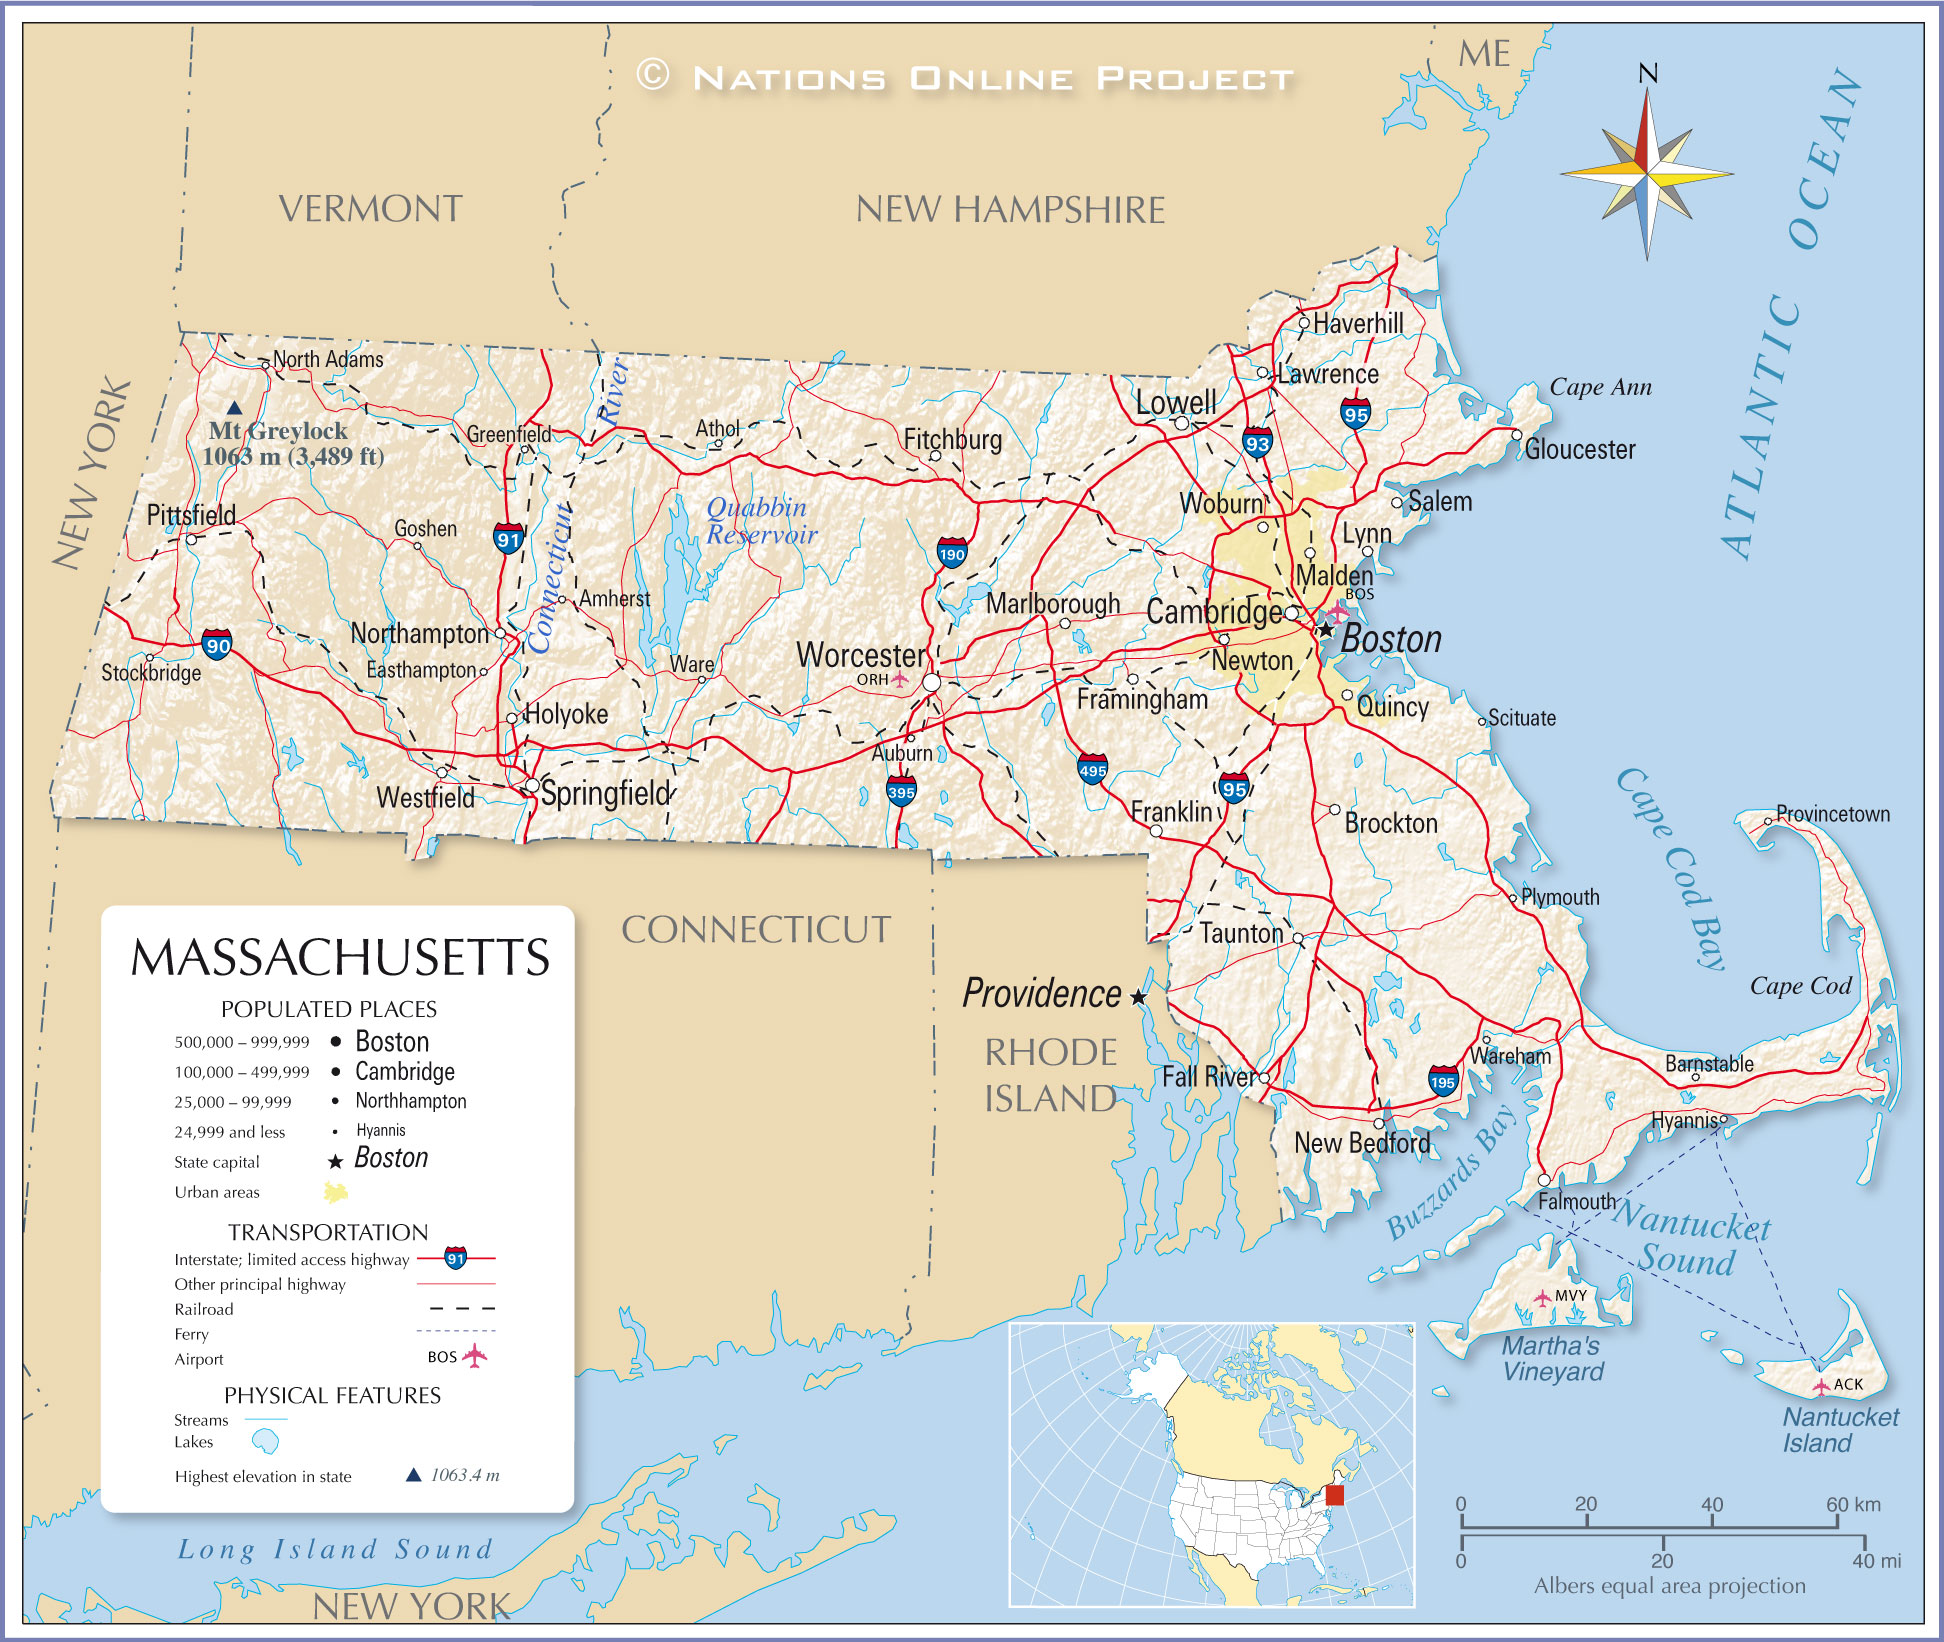 map-of-the-commonwealth-of-massachusetts-usa-nations-online-project